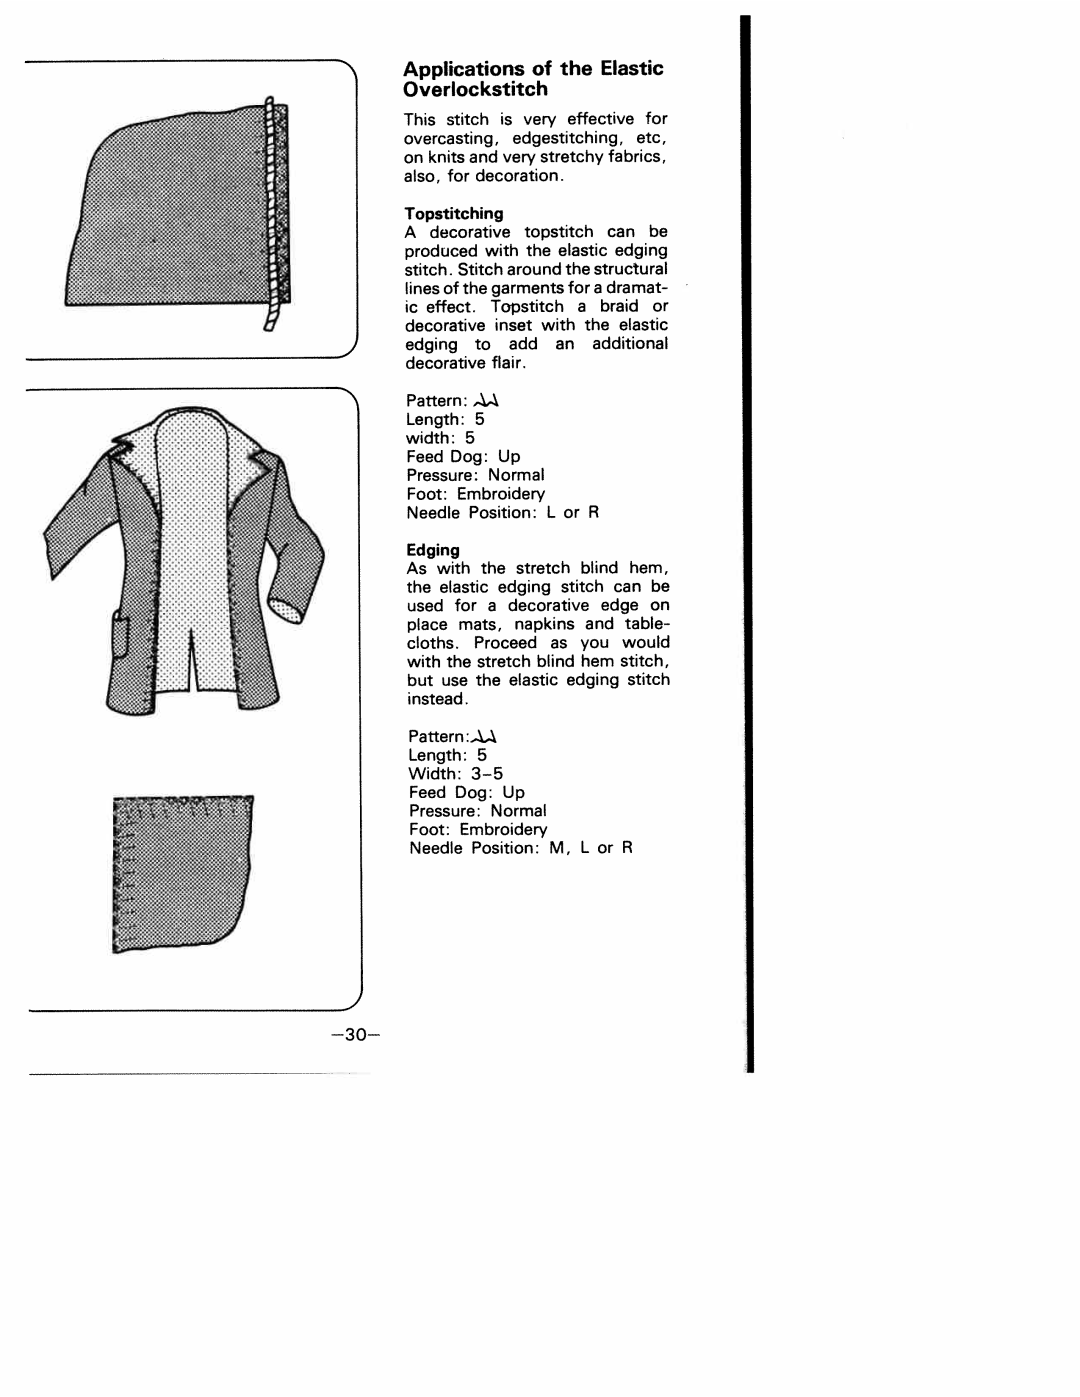 White 1927 manual Applications of the Elastic Overlockstitch 